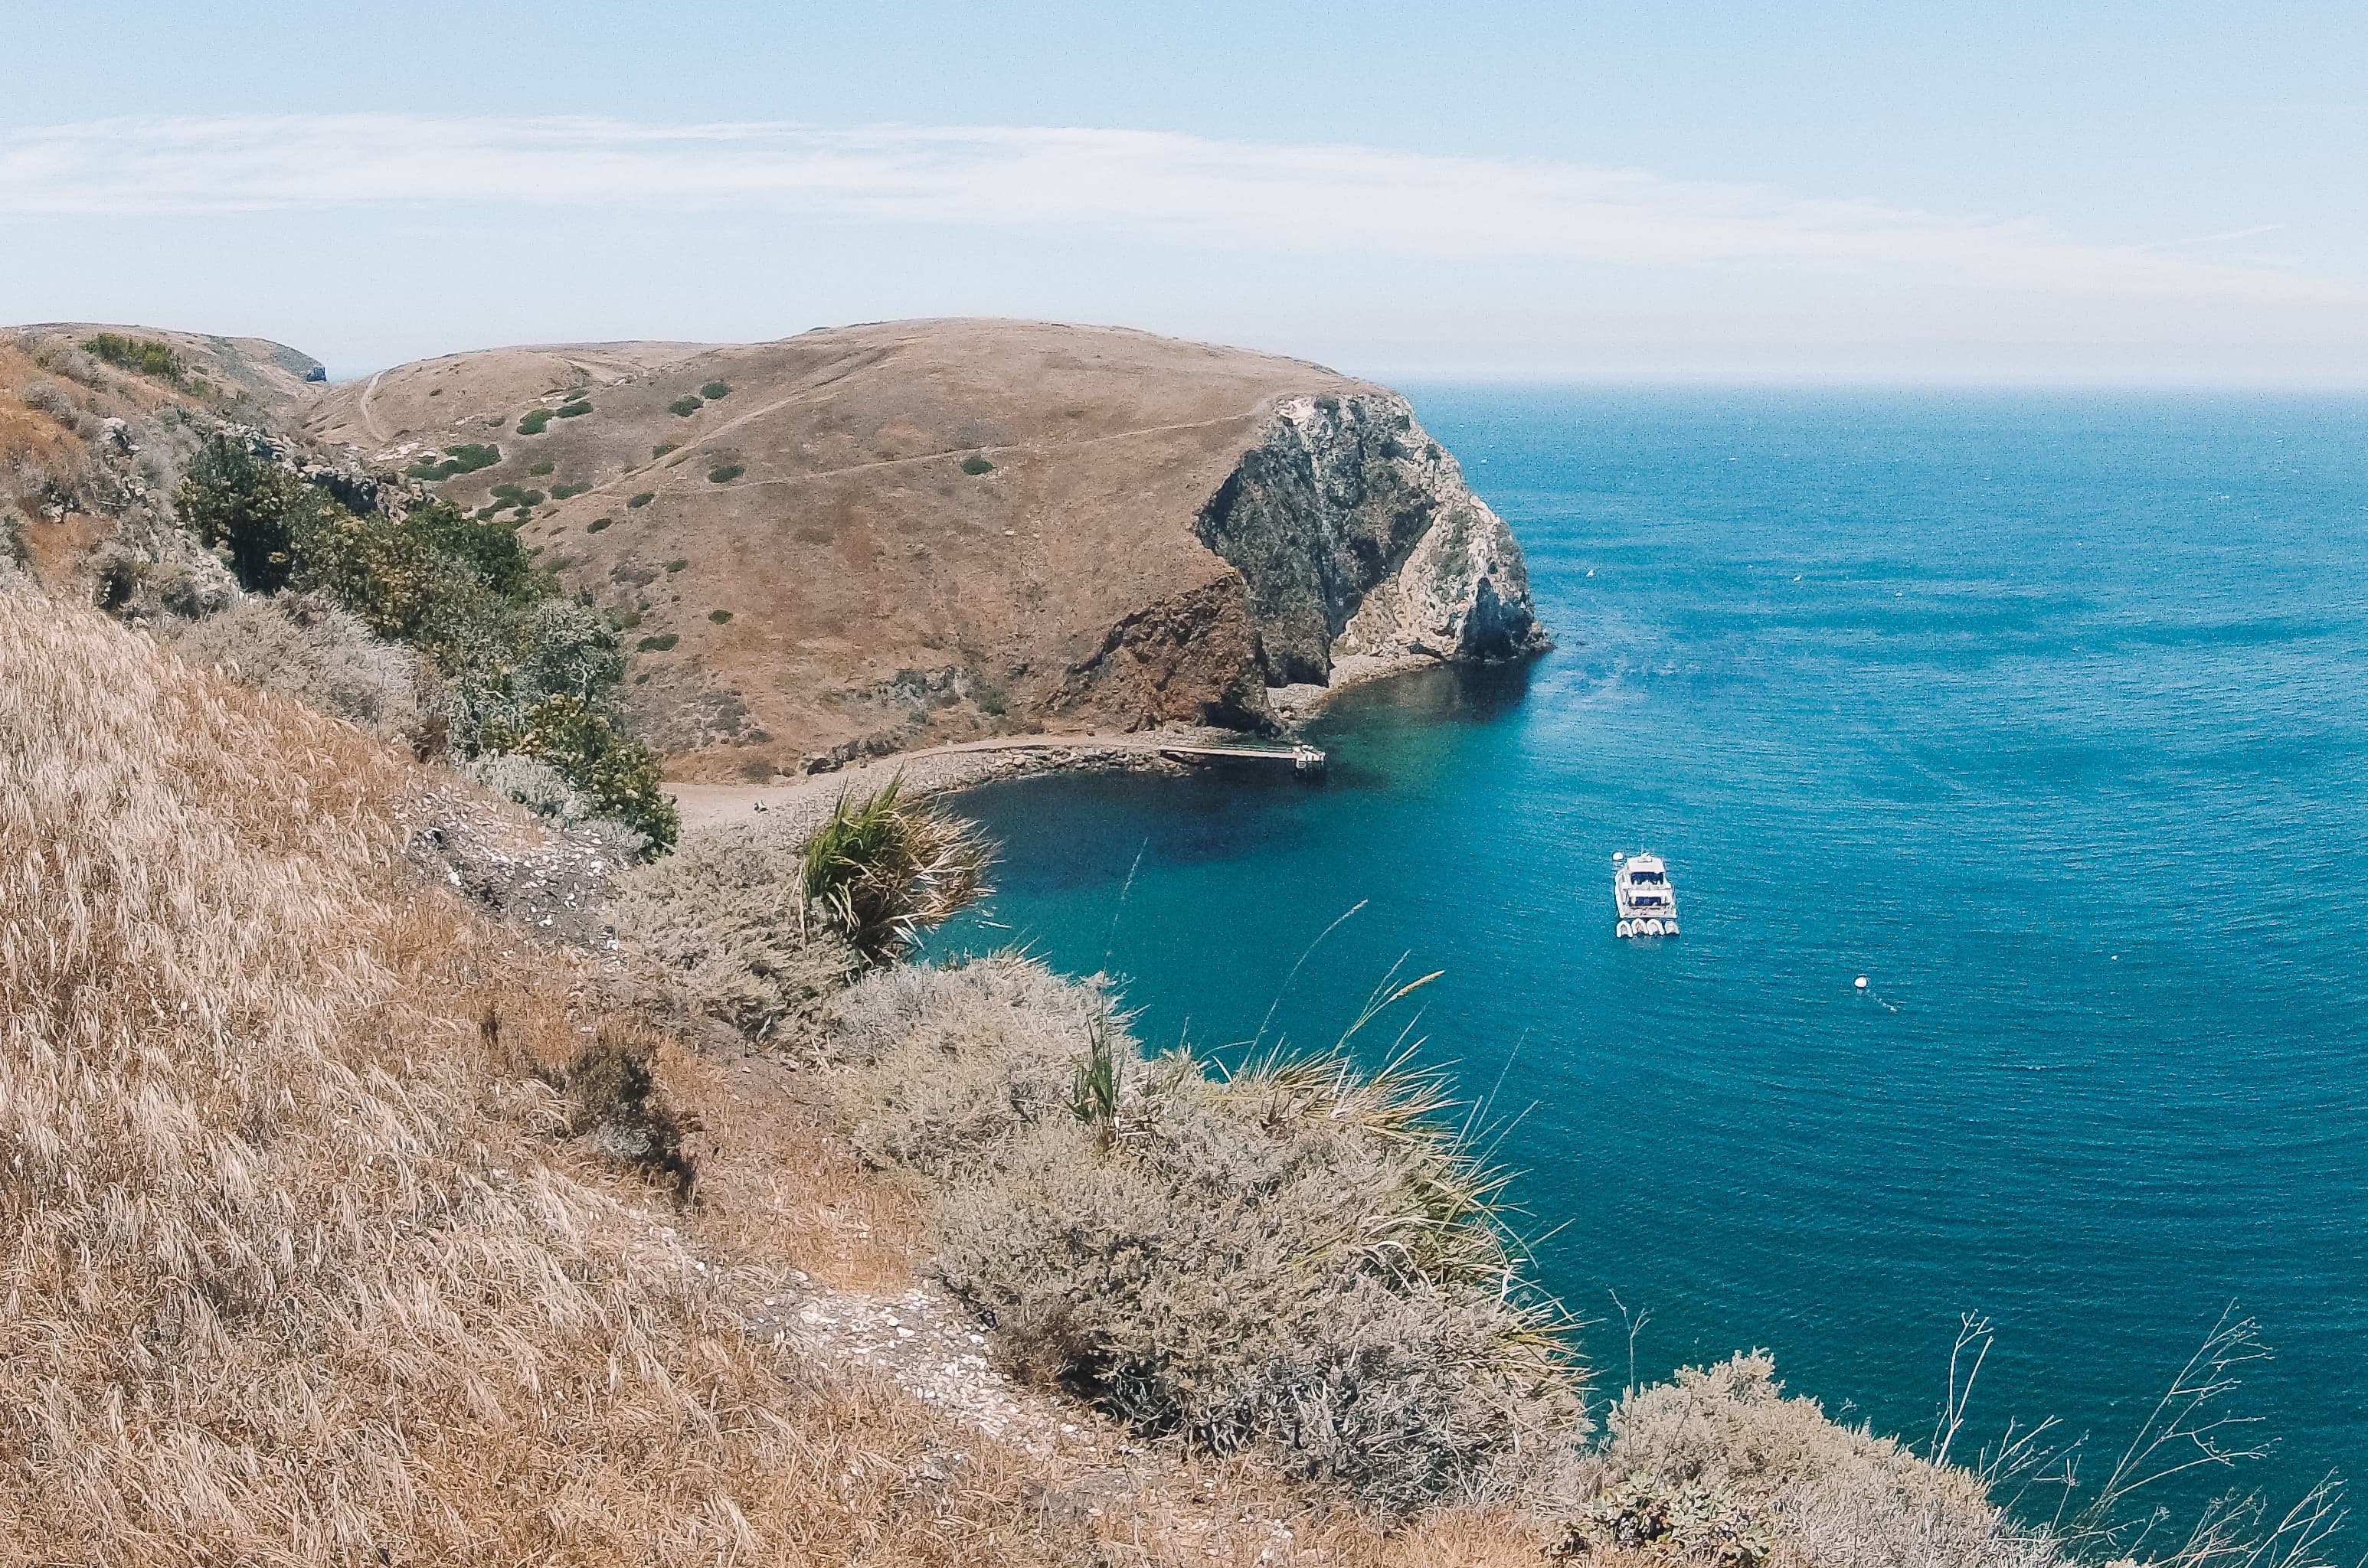 1 Day at Channel Islands National Park in California